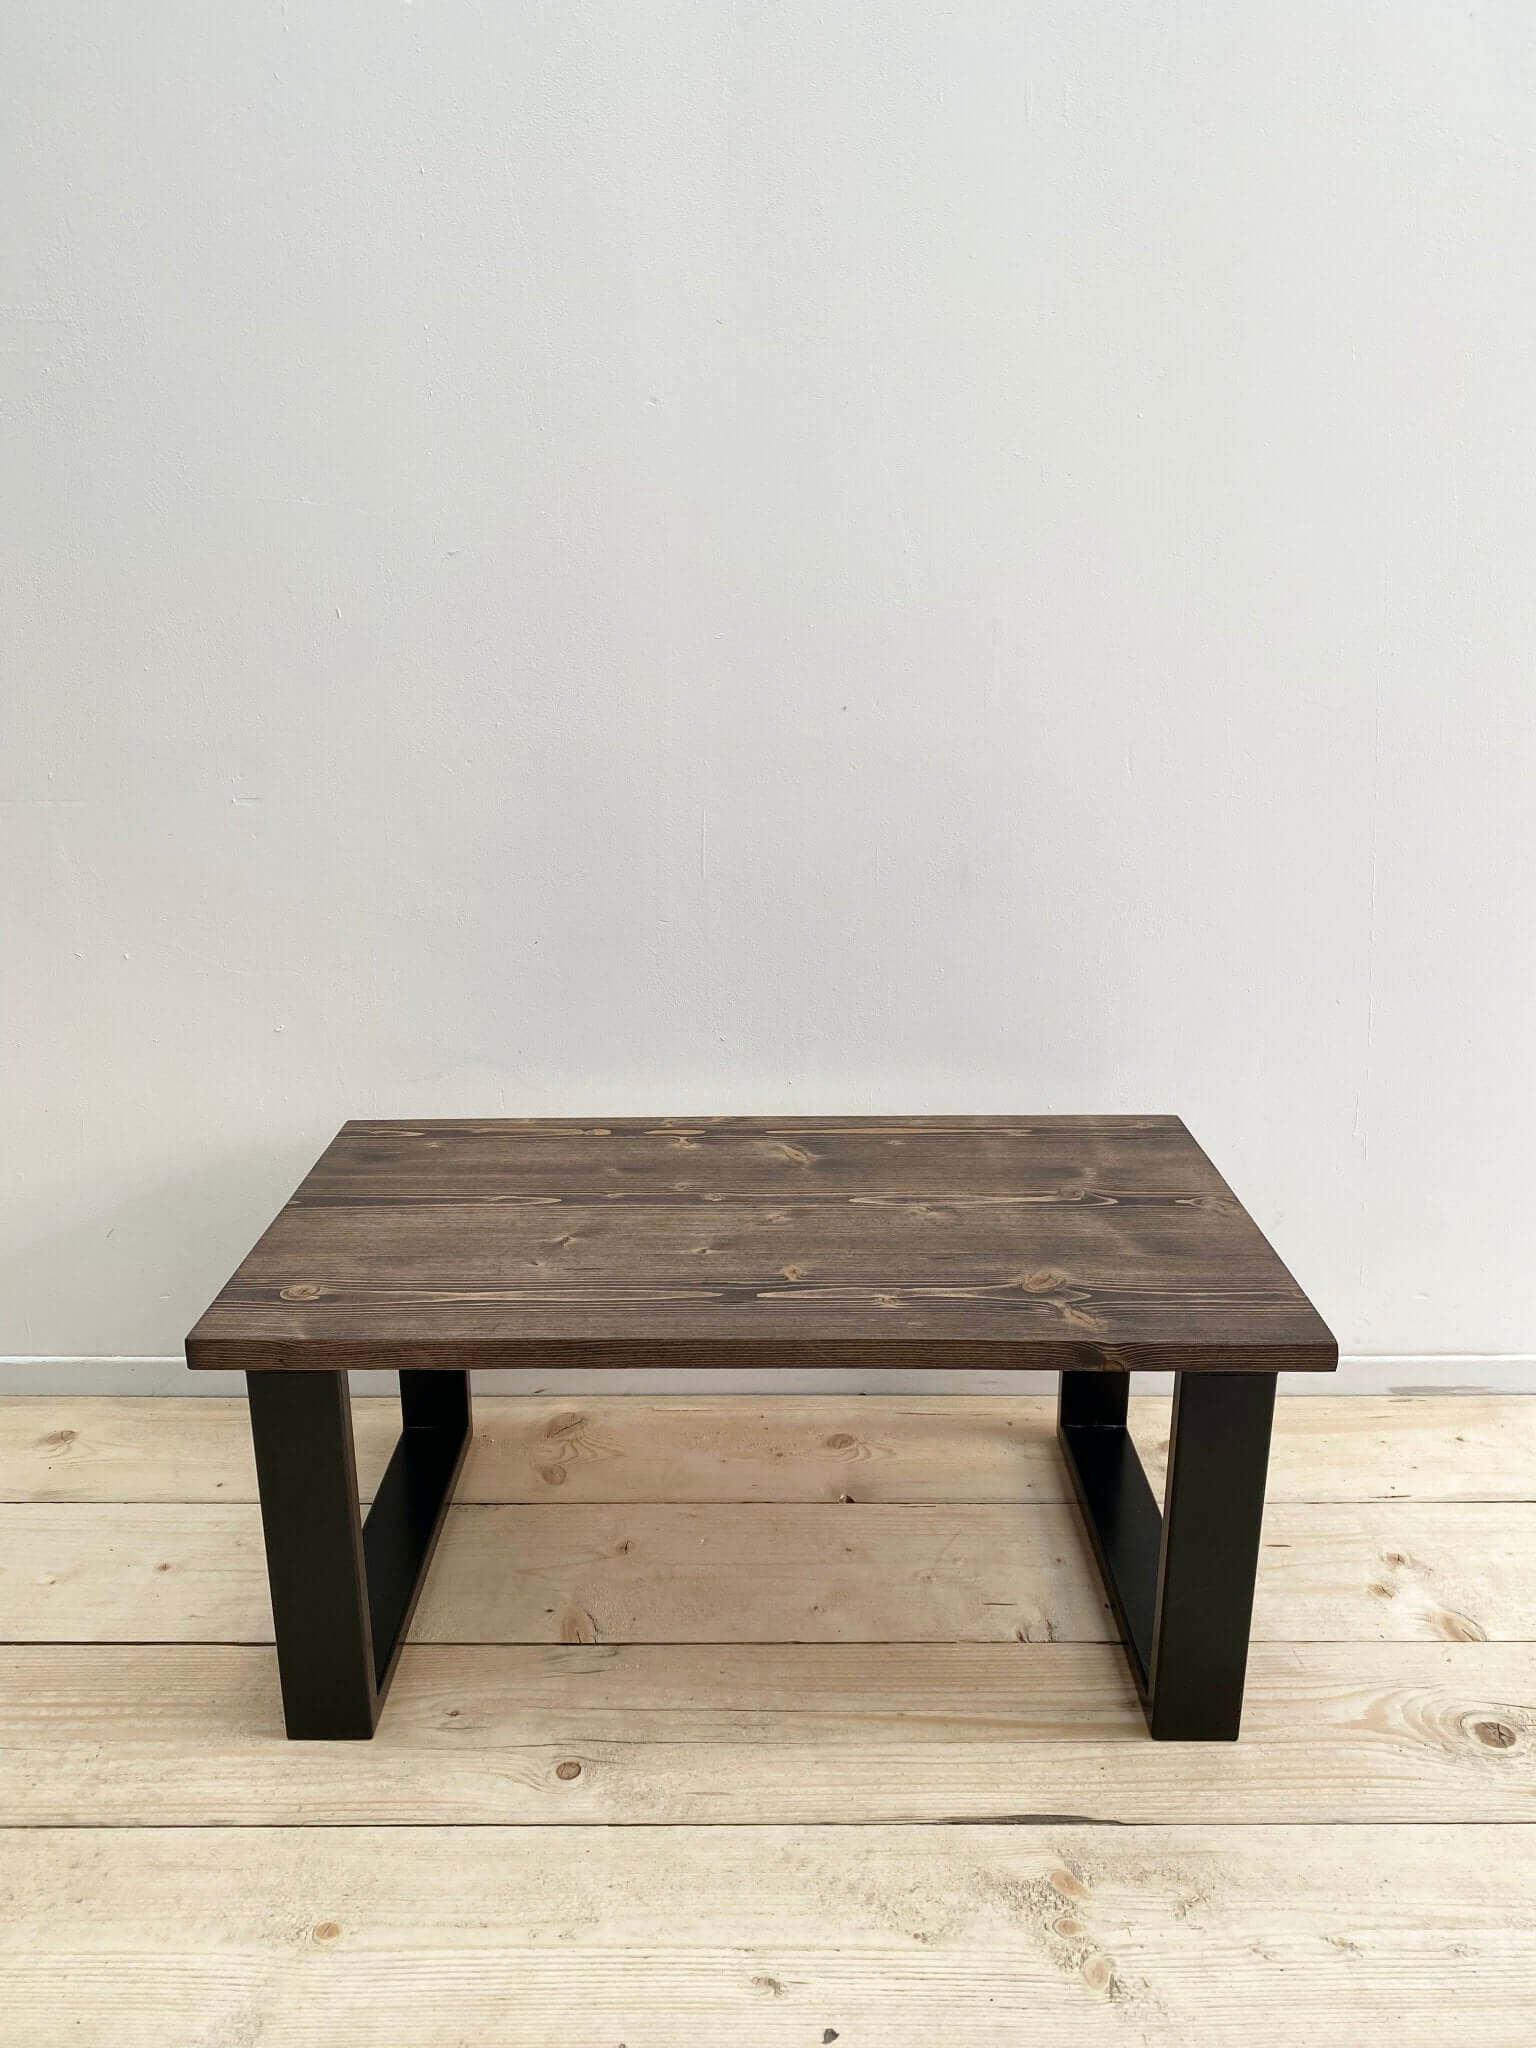 Reclaimed wood coffee table with industrial legs.